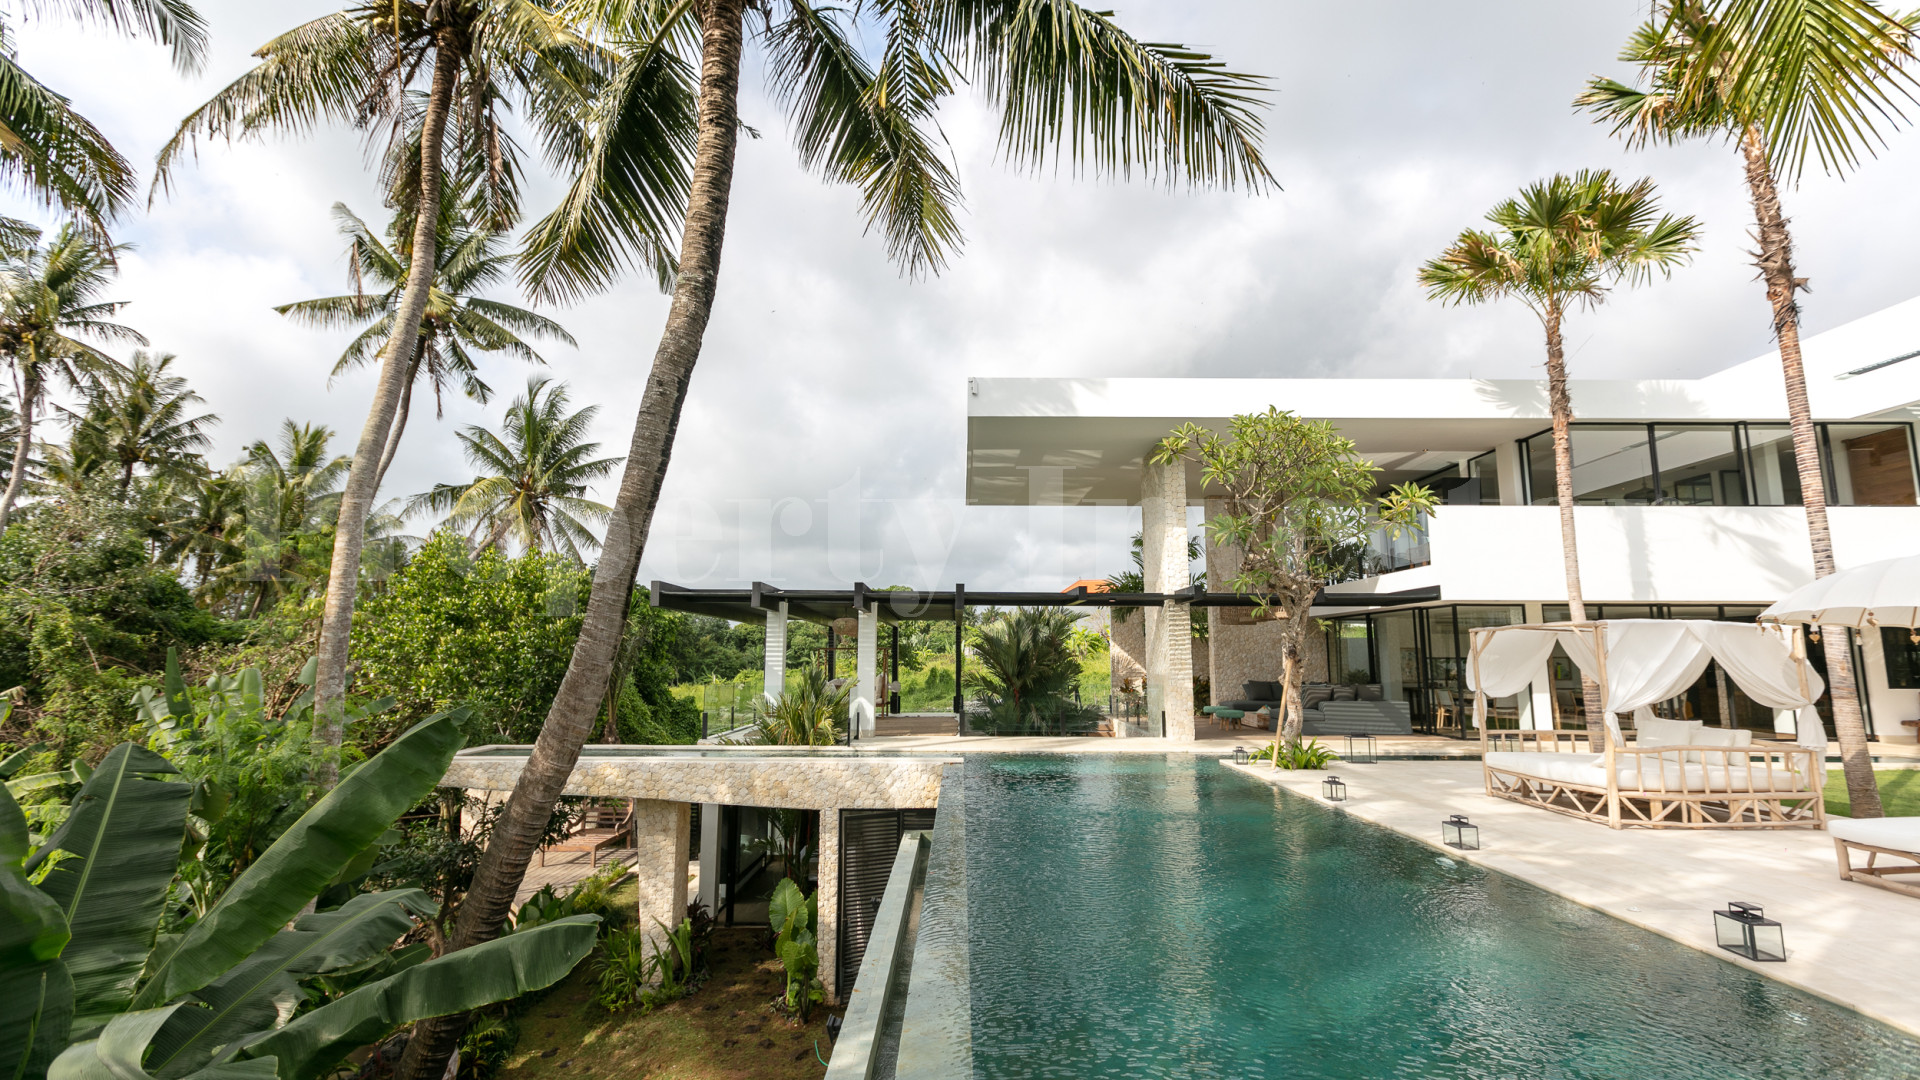 Breathtaking 7 Bedroom Ultra-Modern Luxury Villa with Incredible Infinity Pool & Outdoor Spaces for Sale in Pererenan-Canggu, Bali